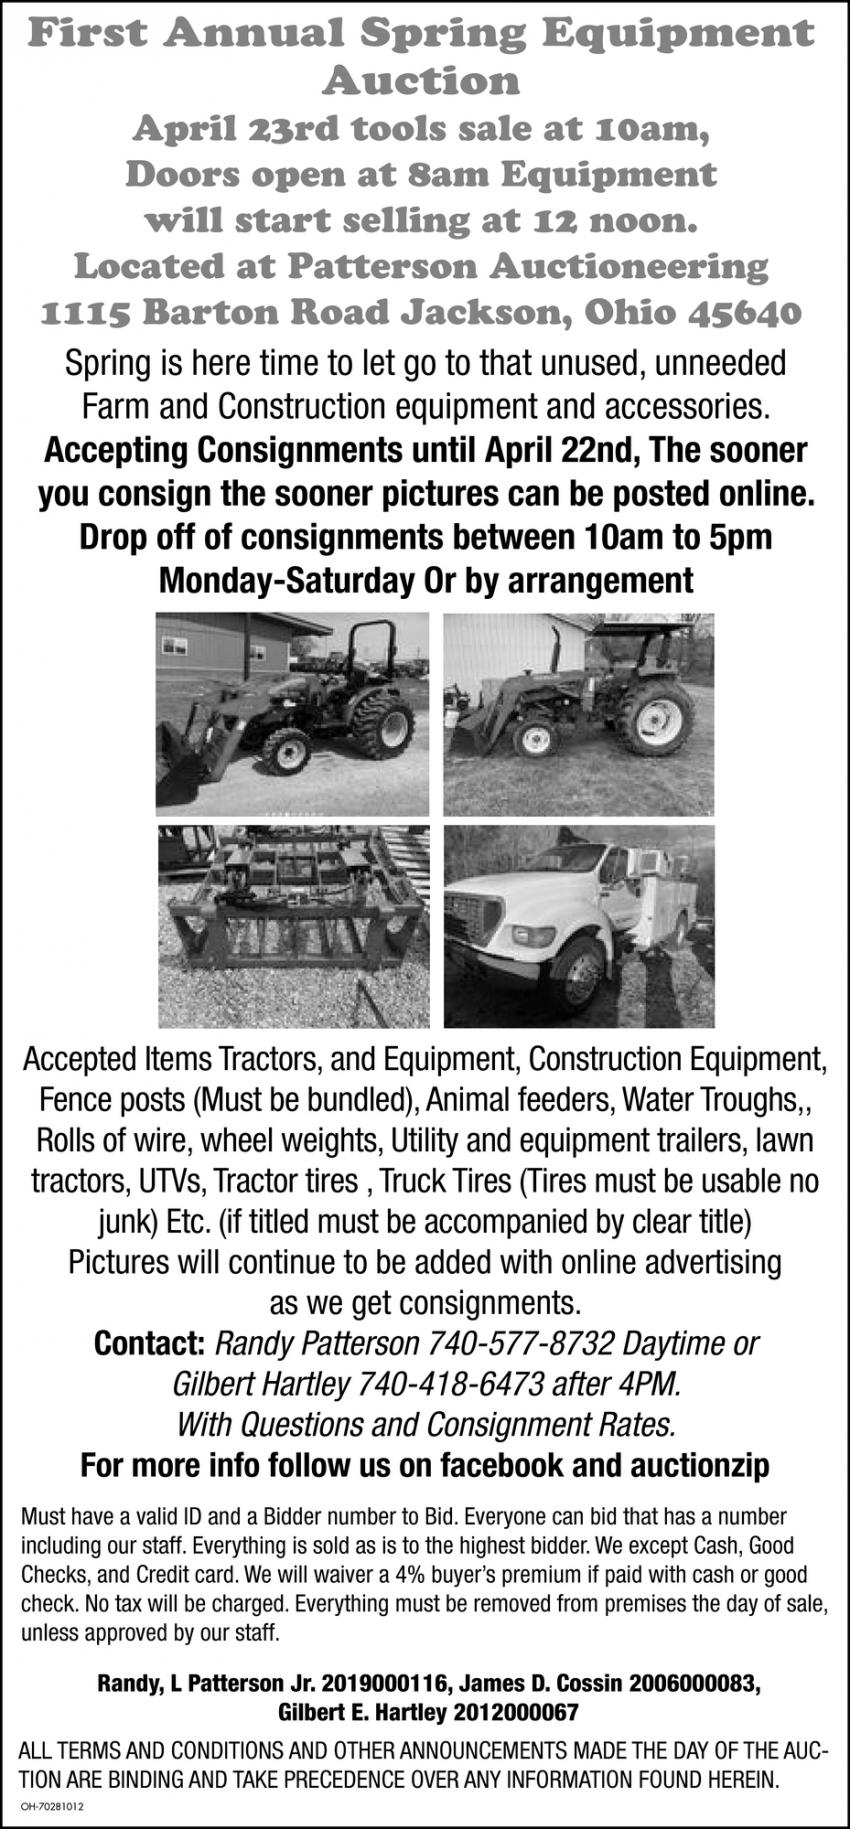 First Annual Spring Equipment Auction